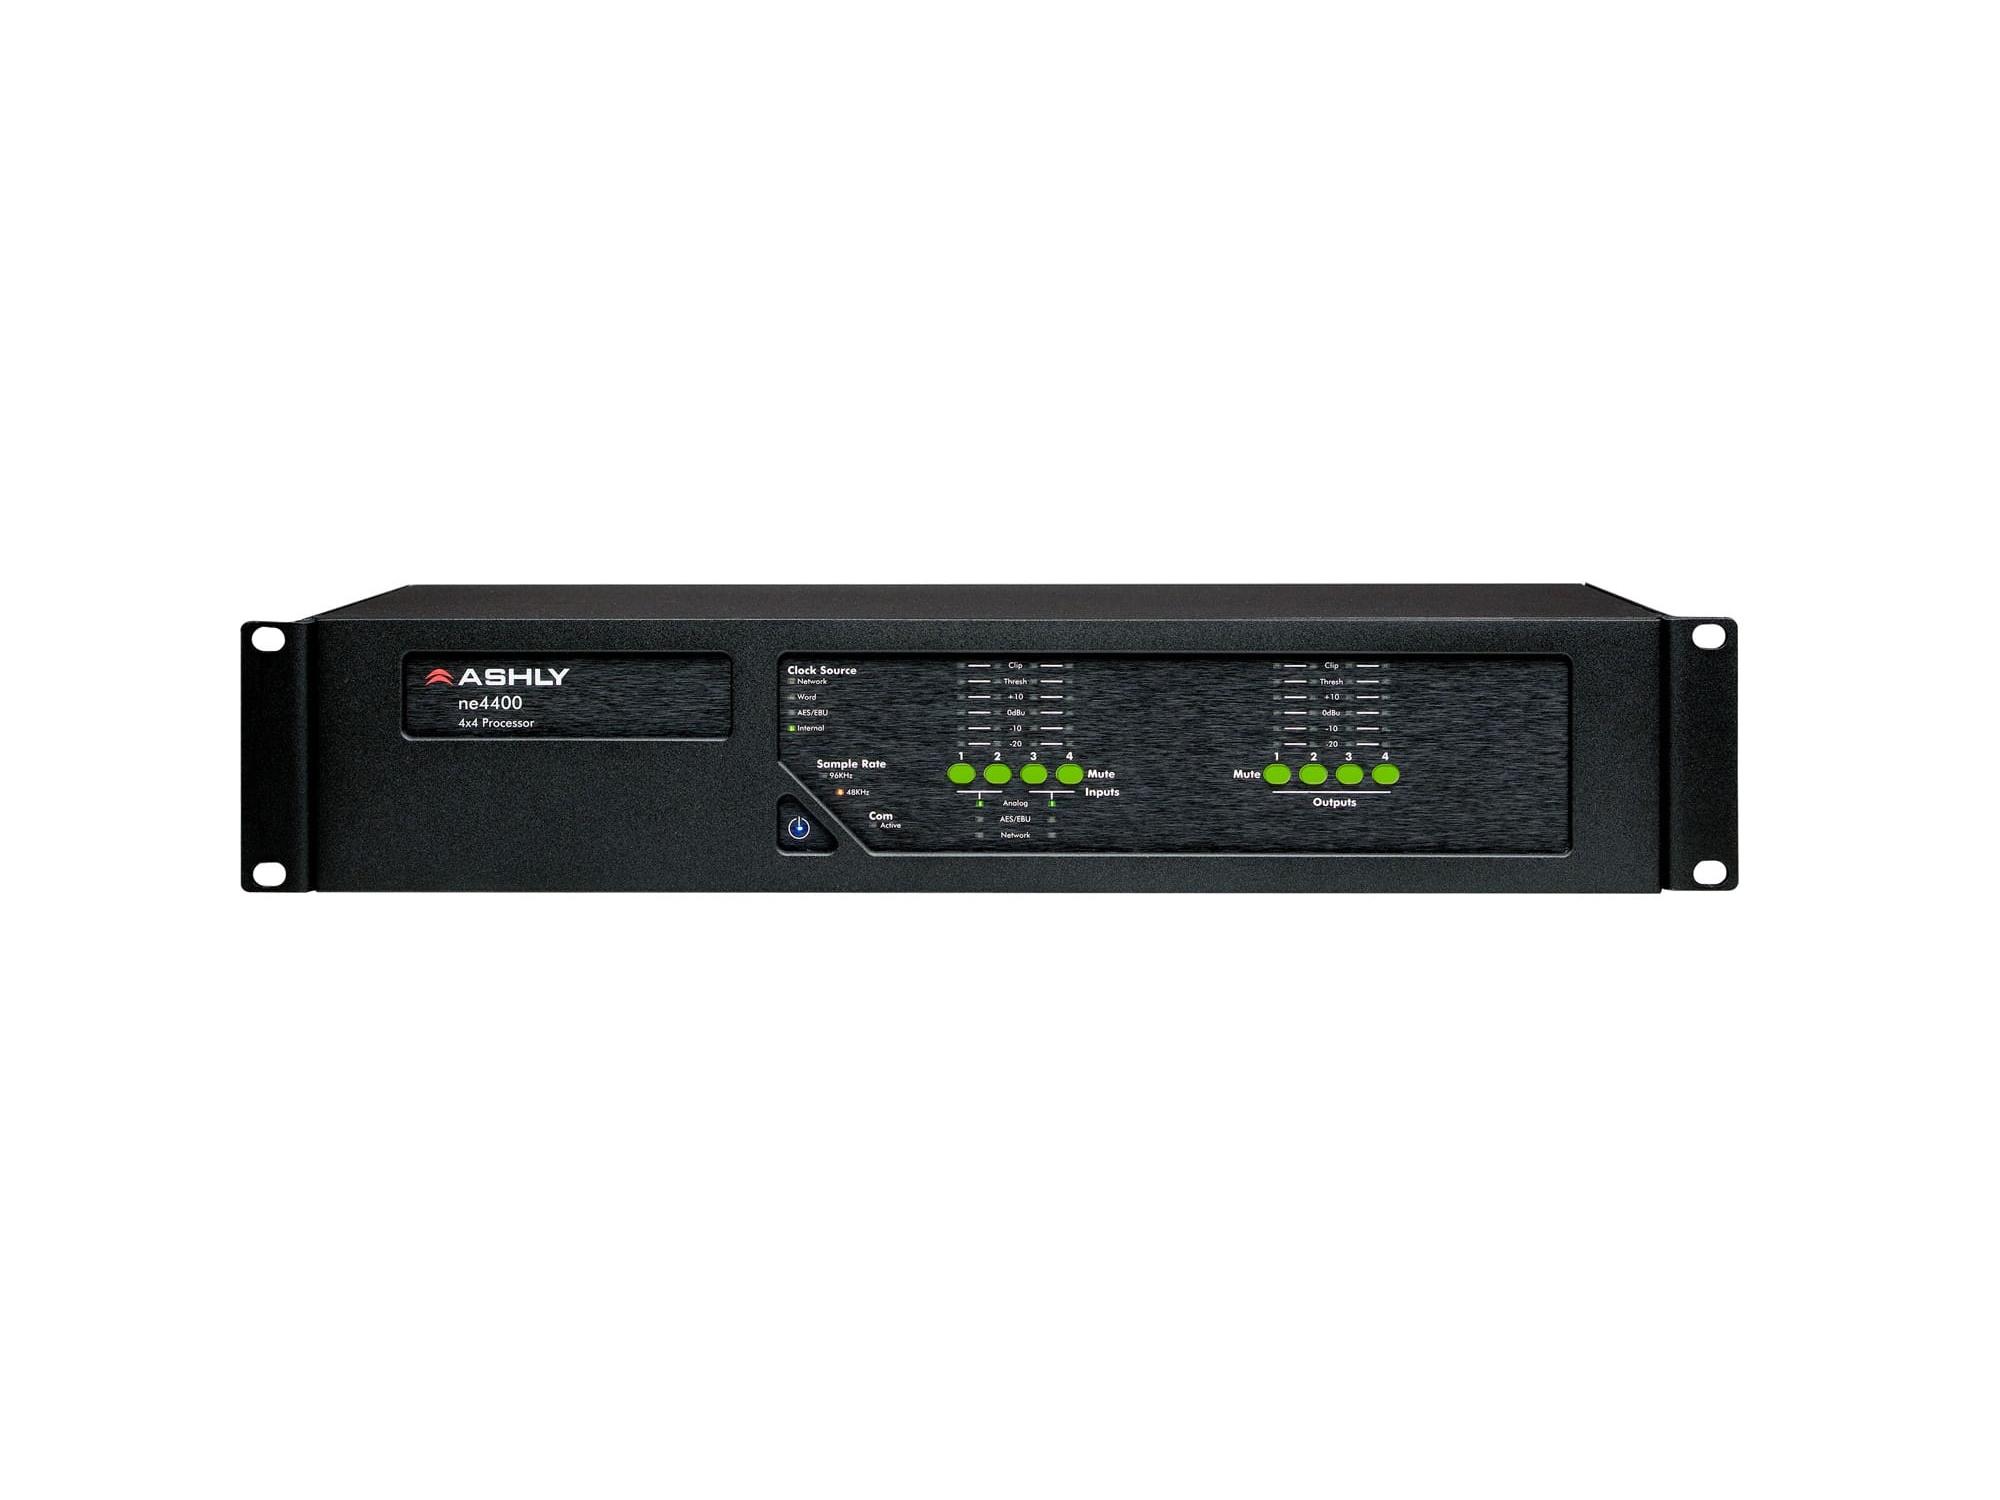 ne4400ms Network Enabled Digital Signal Processor with Mic Input and AES Output Options by Ashly